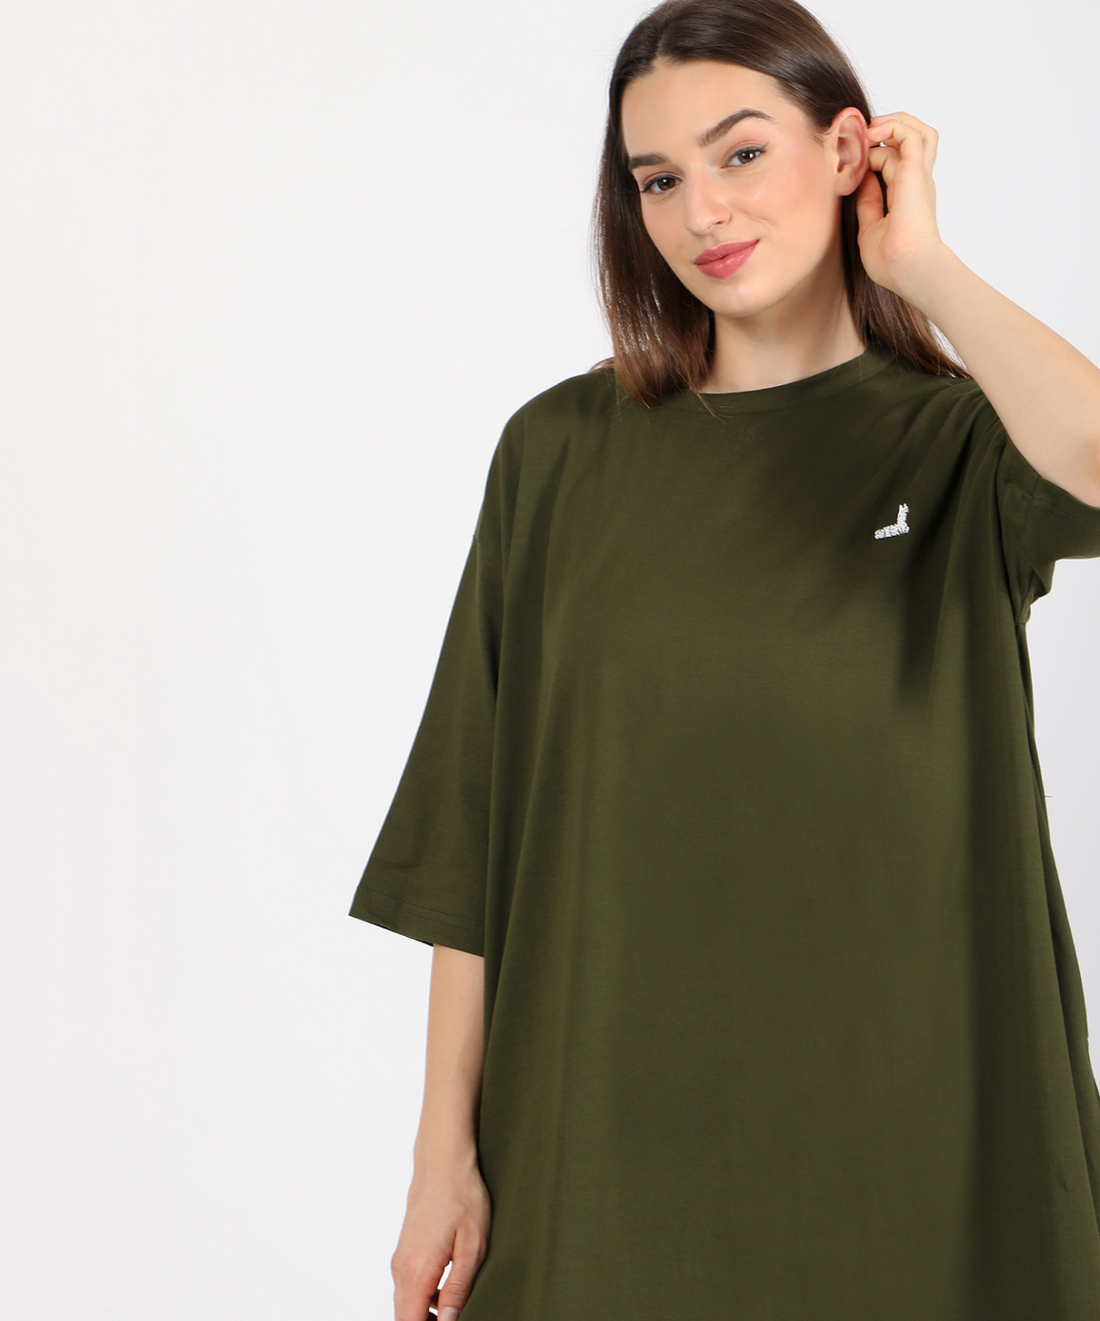 In The Forest Green Oversized Pocket Tee